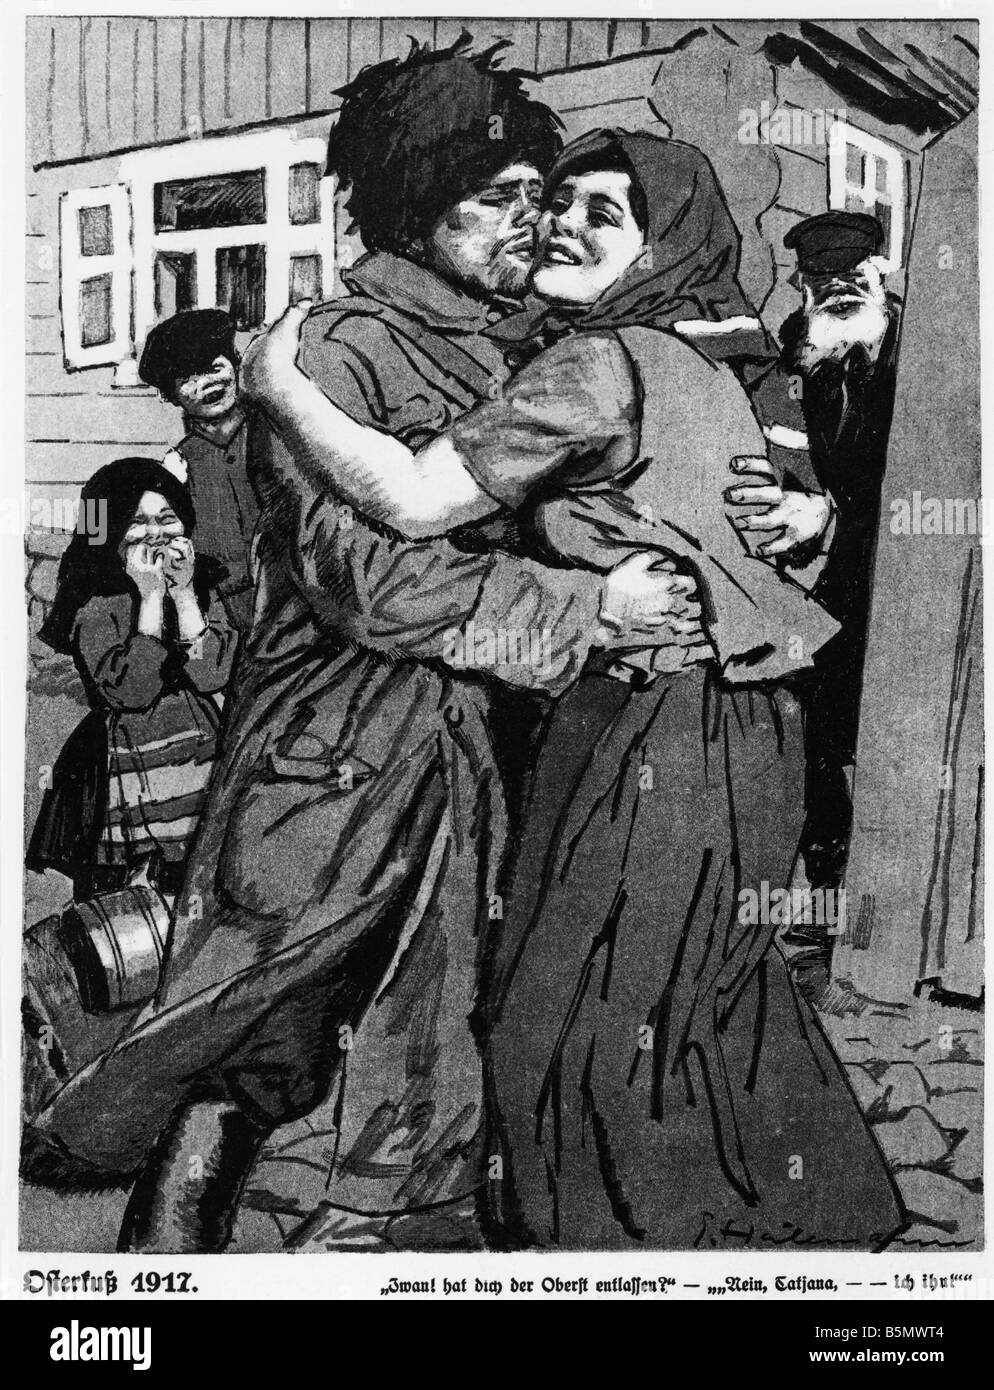 9RD 1917 4 8 C1 Revolution 1917 Cartoon Lustige Bl tt Russia Great War and Revolution of 1917 Easter Kiss 1917 Ivan so your offi Stock Photo